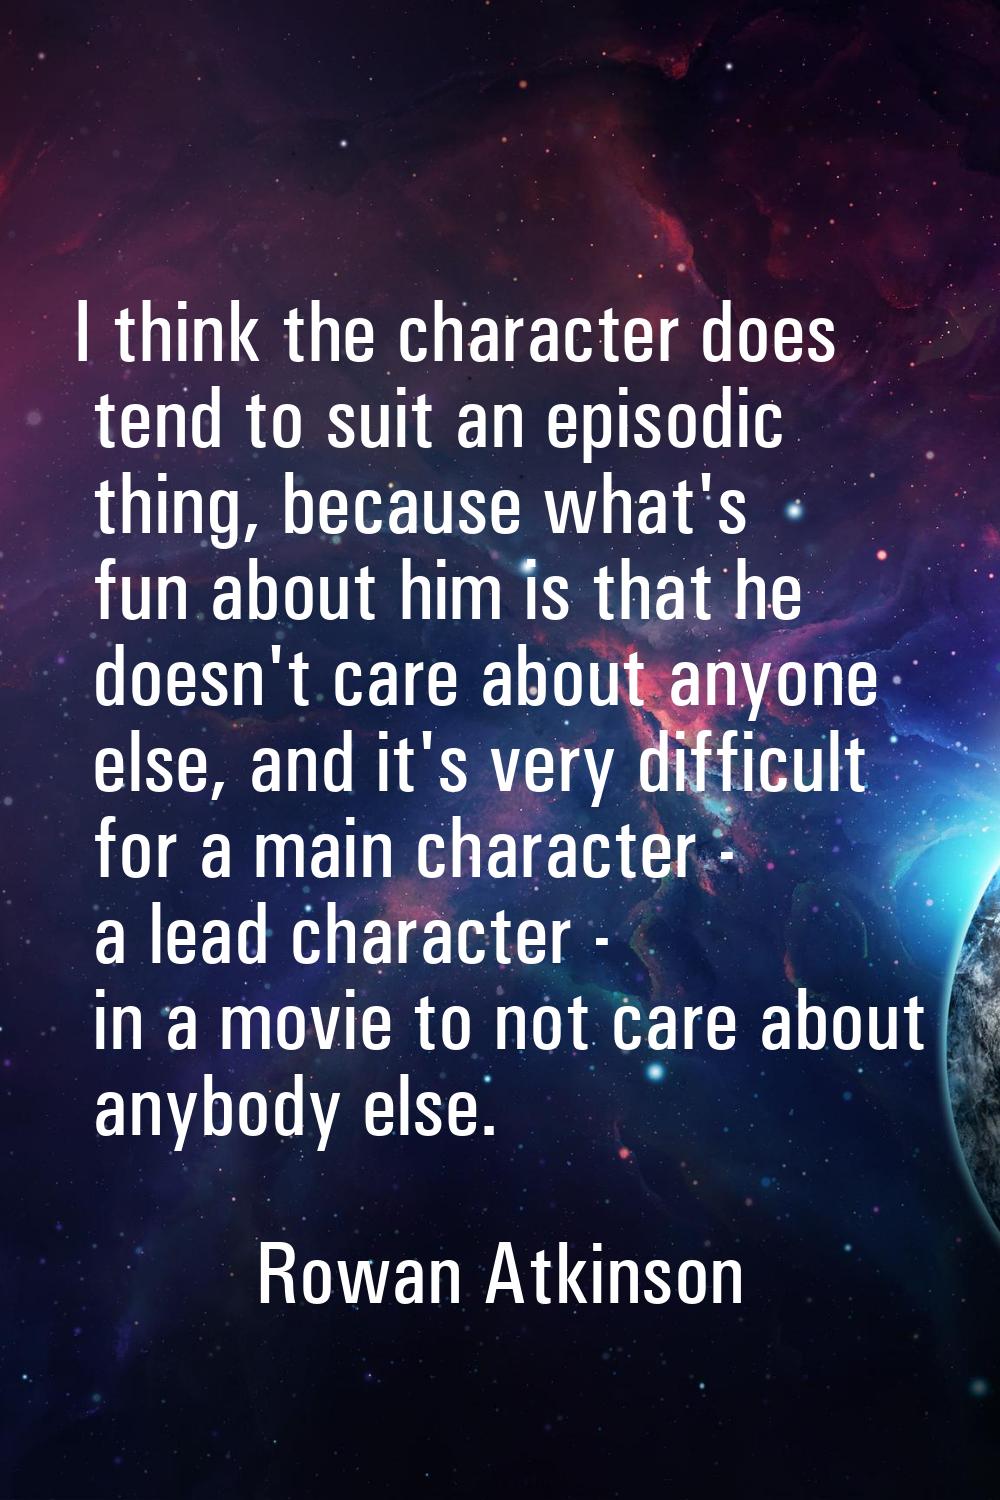 I think the character does tend to suit an episodic thing, because what's fun about him is that he 